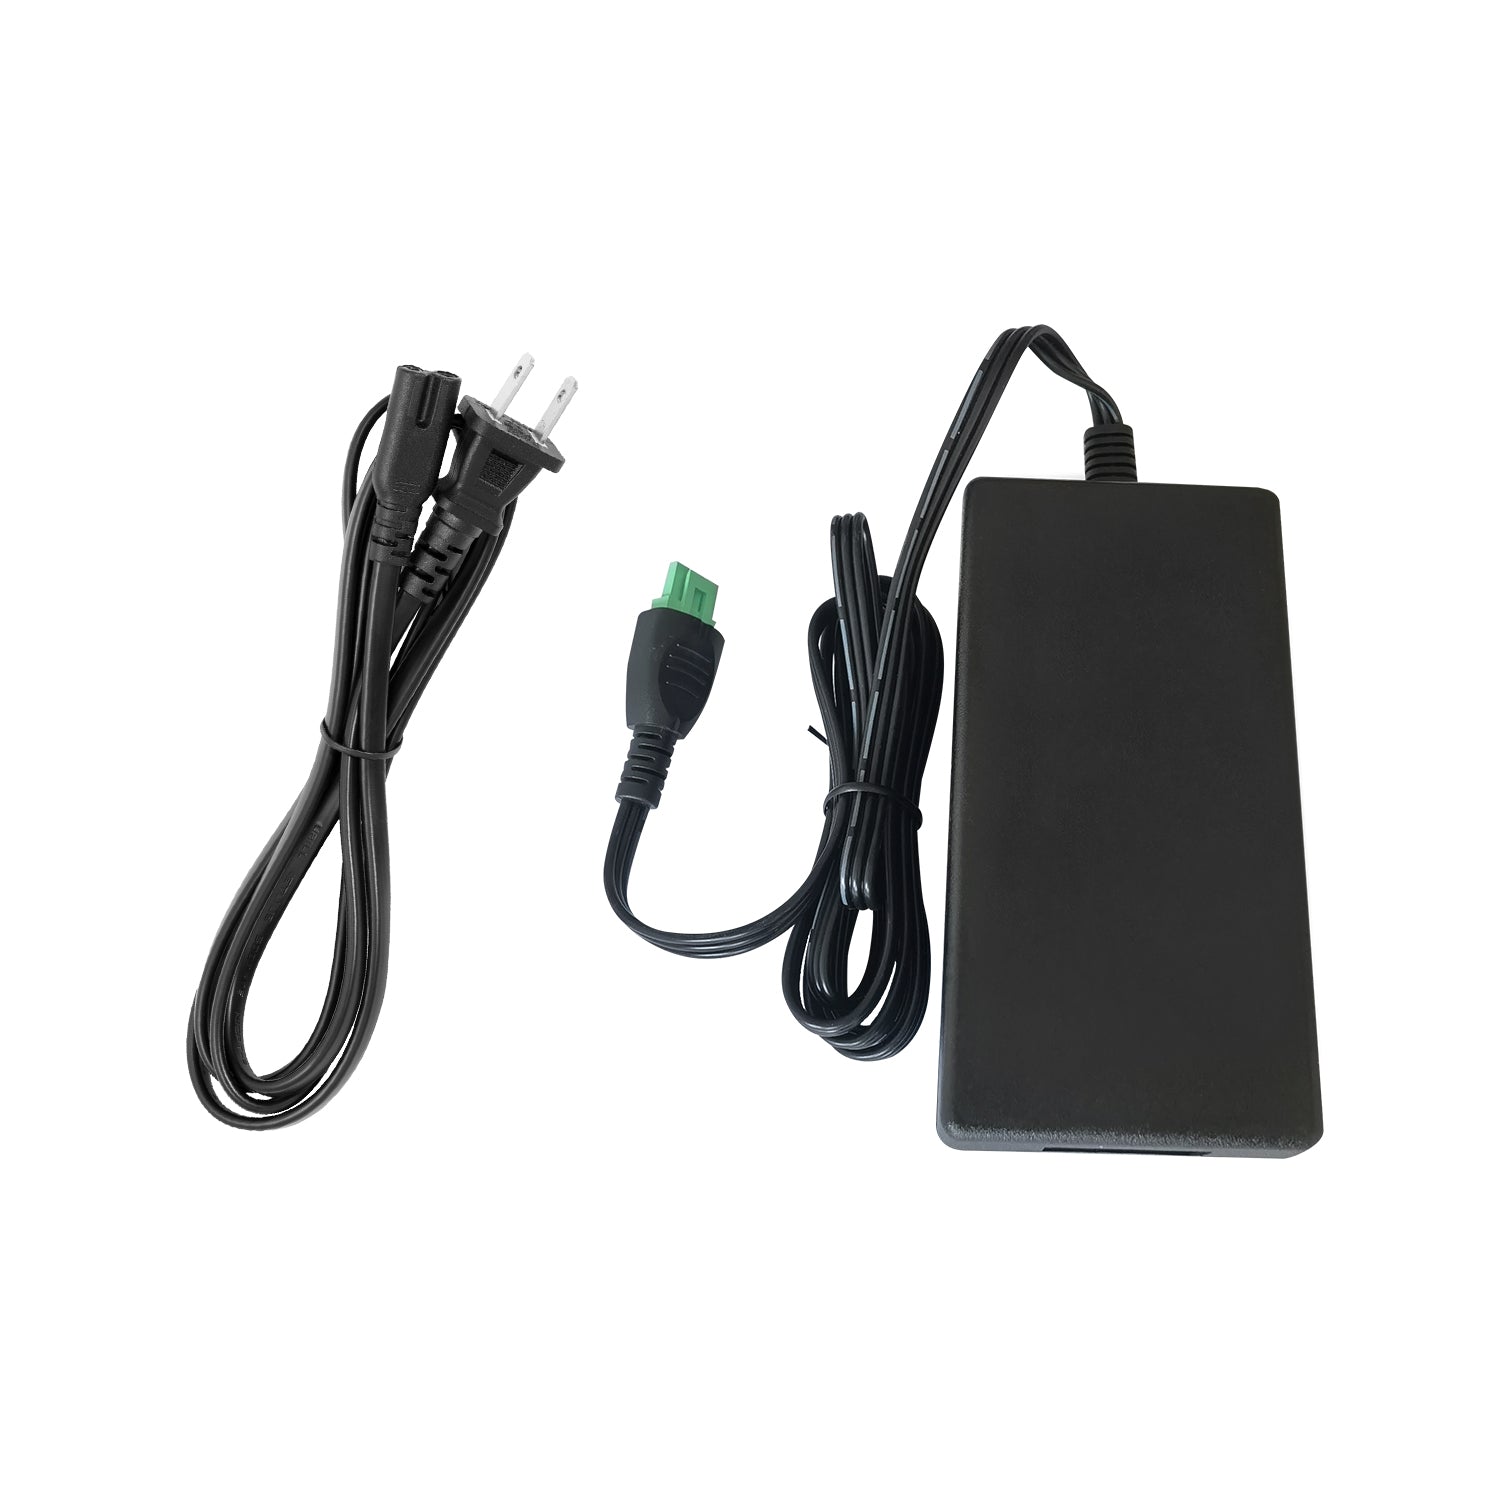 Power Adapter for HP Officejet 7110 All-in-One Printer.